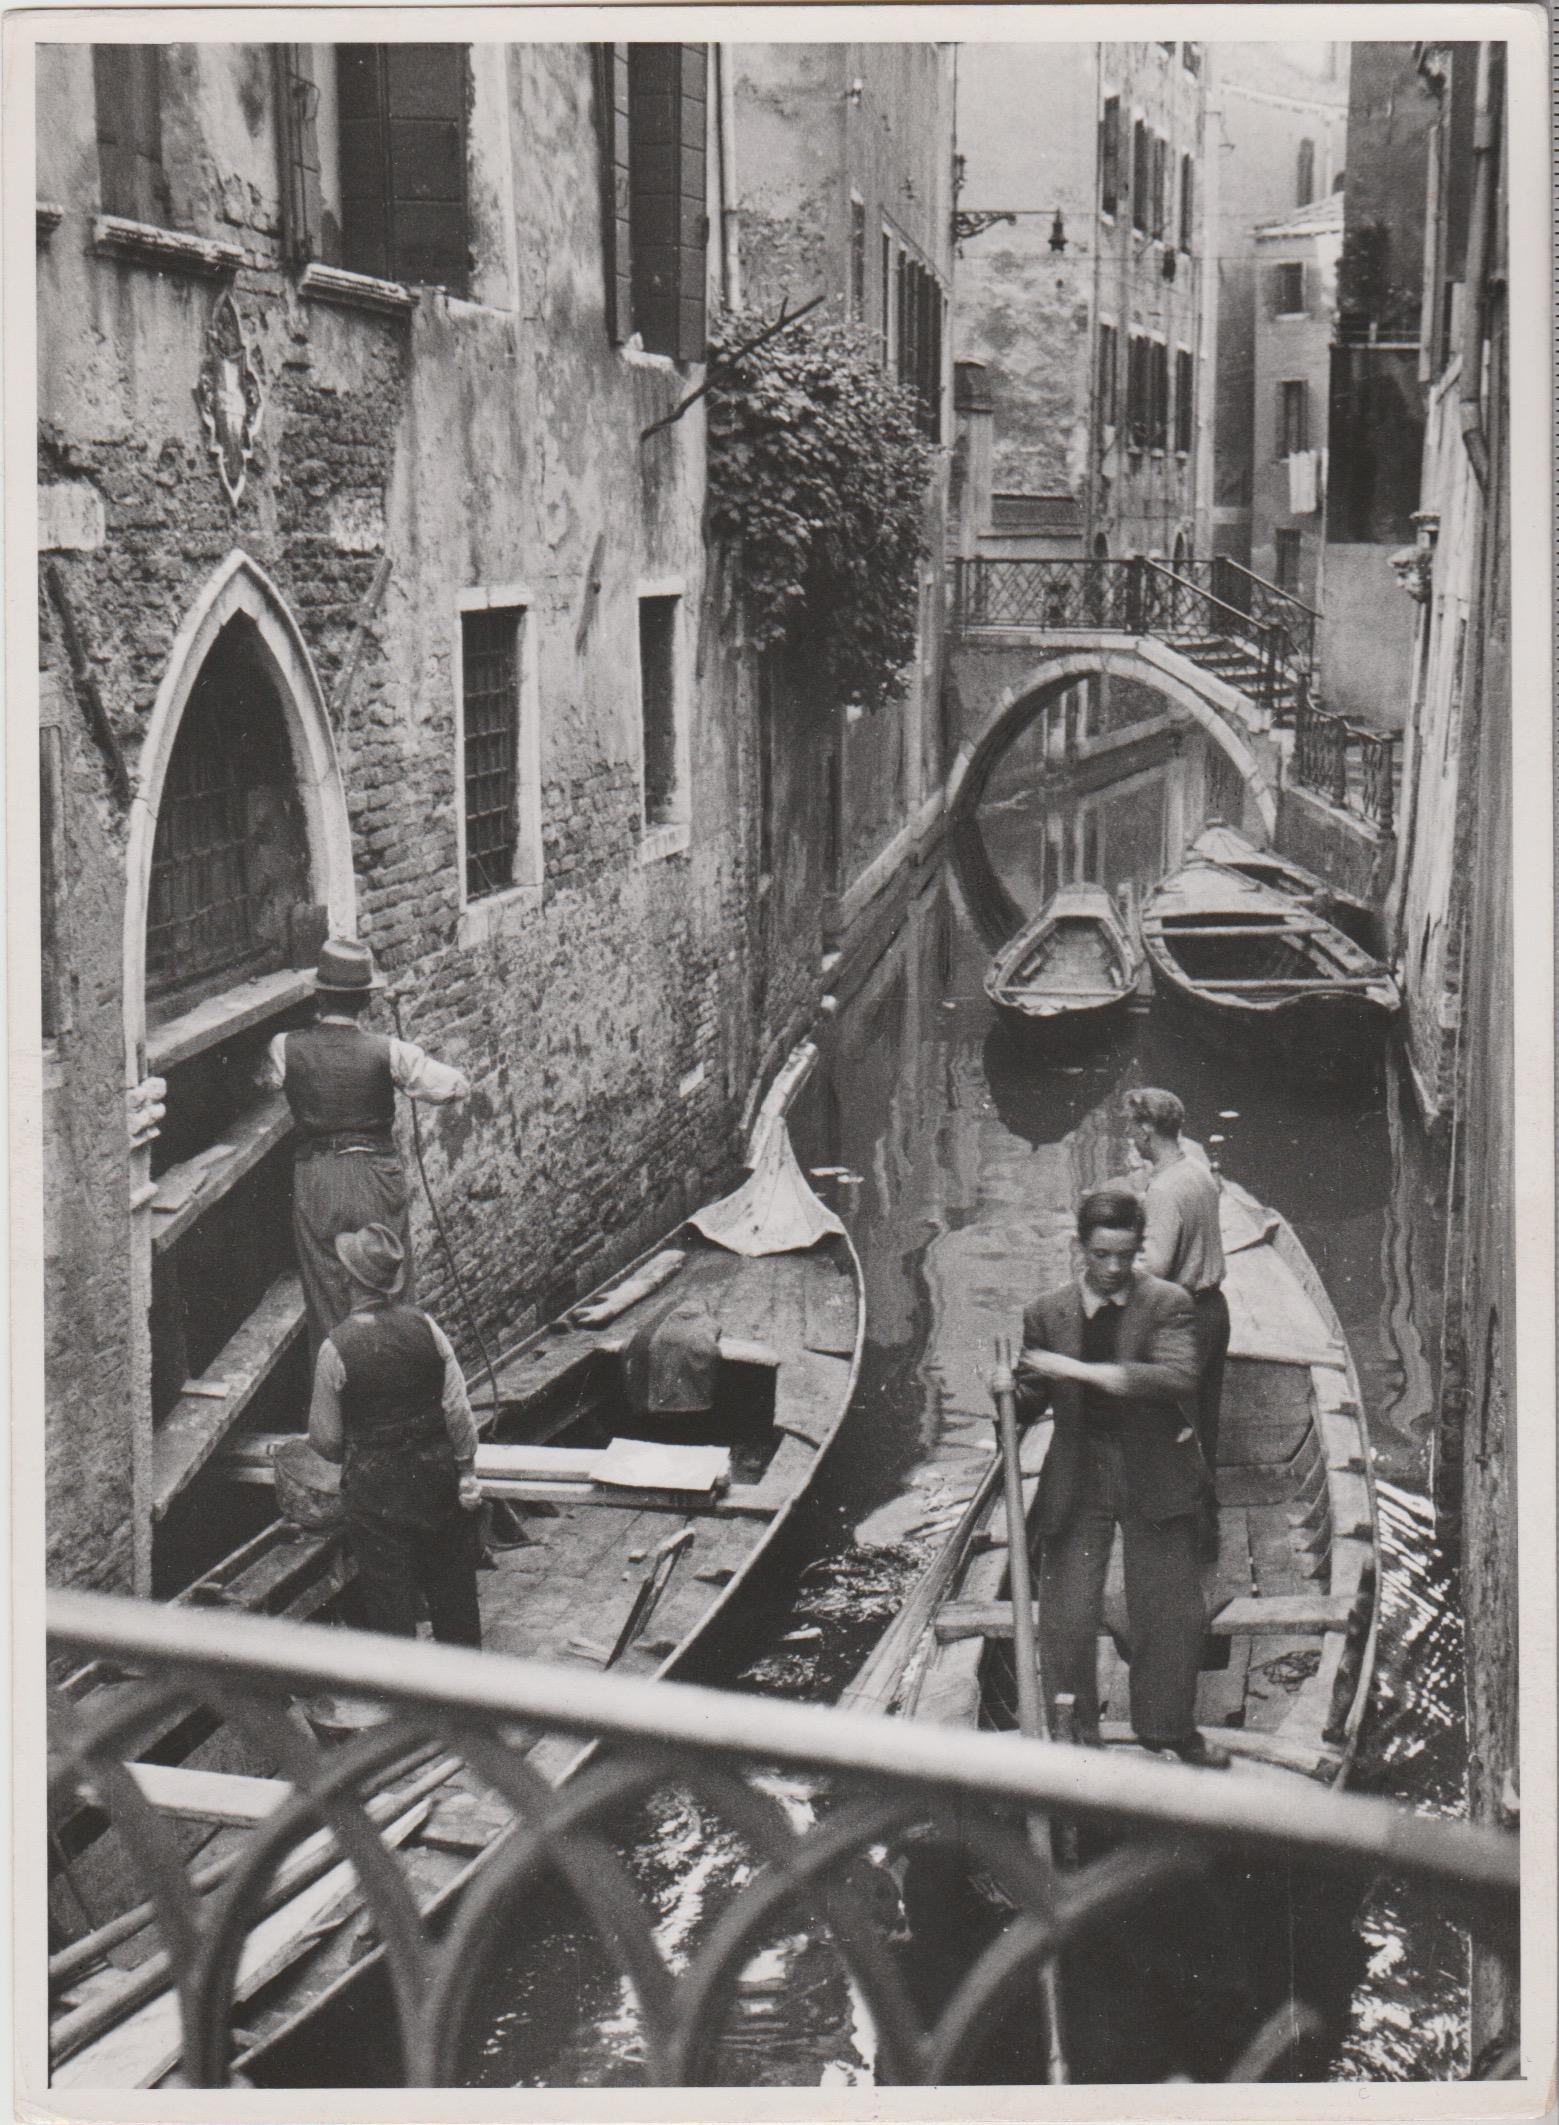 Erich Andres Black and White Photograph - Venice - Gondoliers in a hidden channel